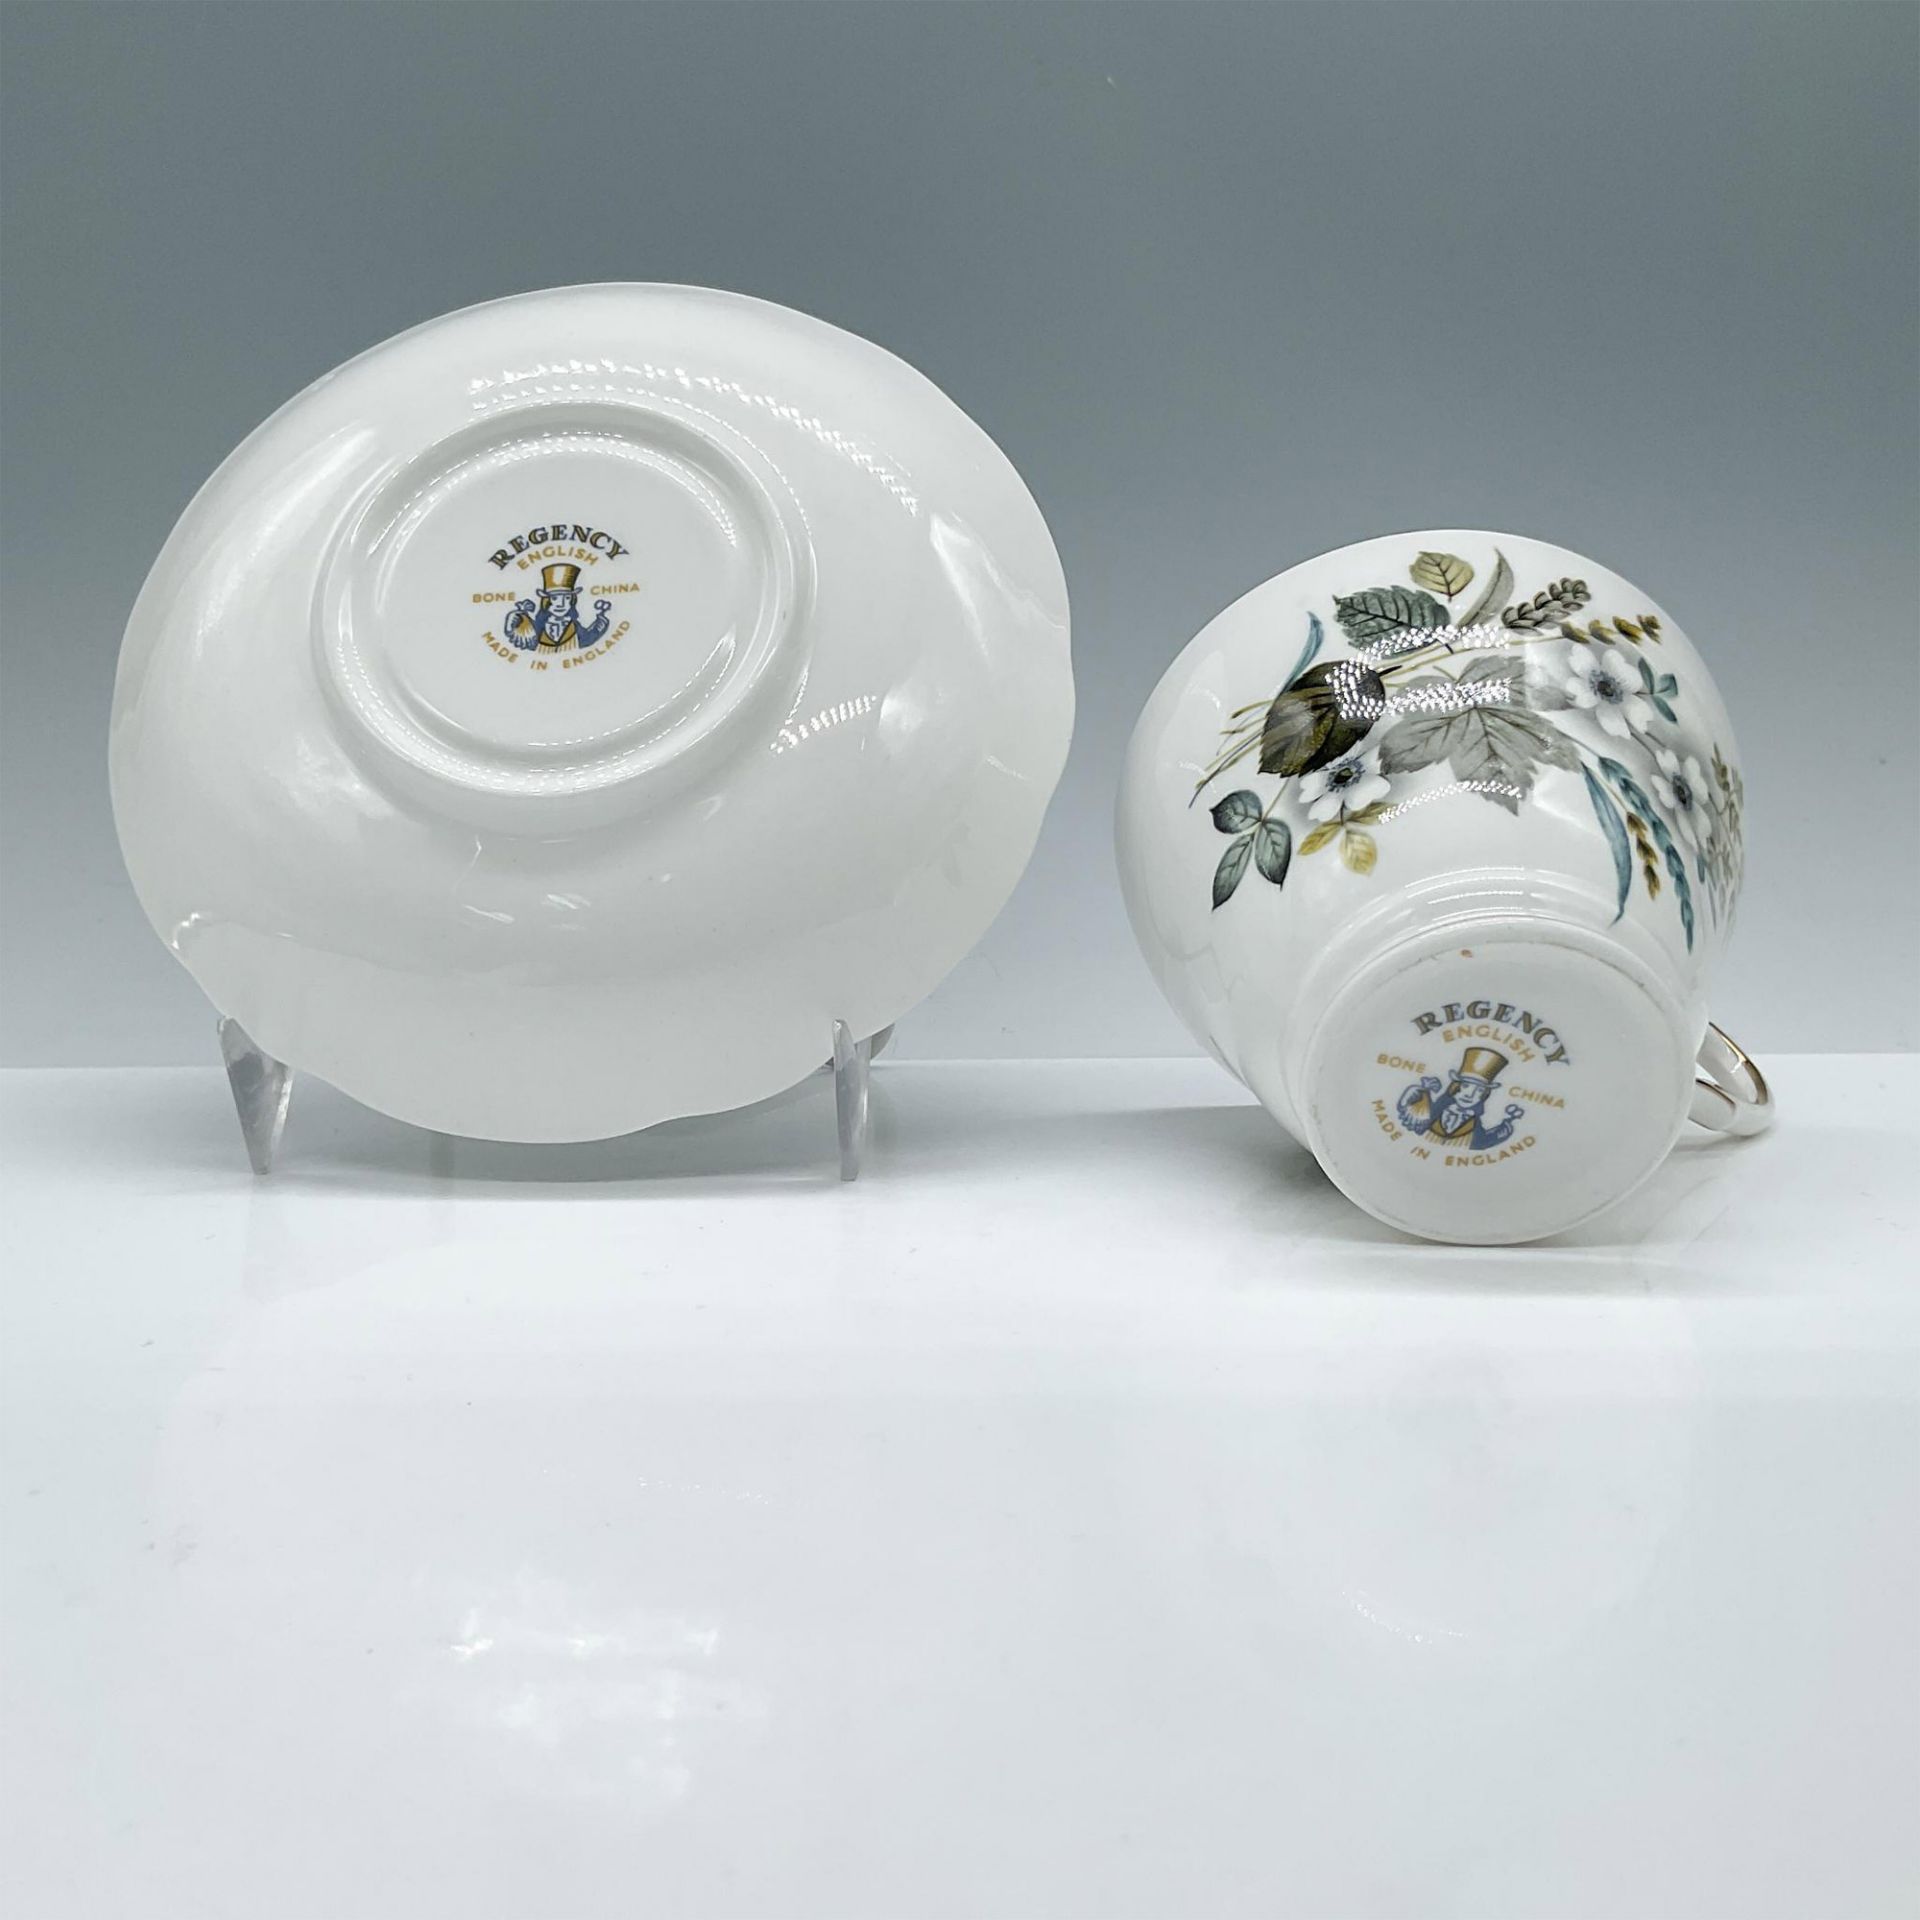 Regency Bone China Tea Cup and Saucer - Image 4 of 4